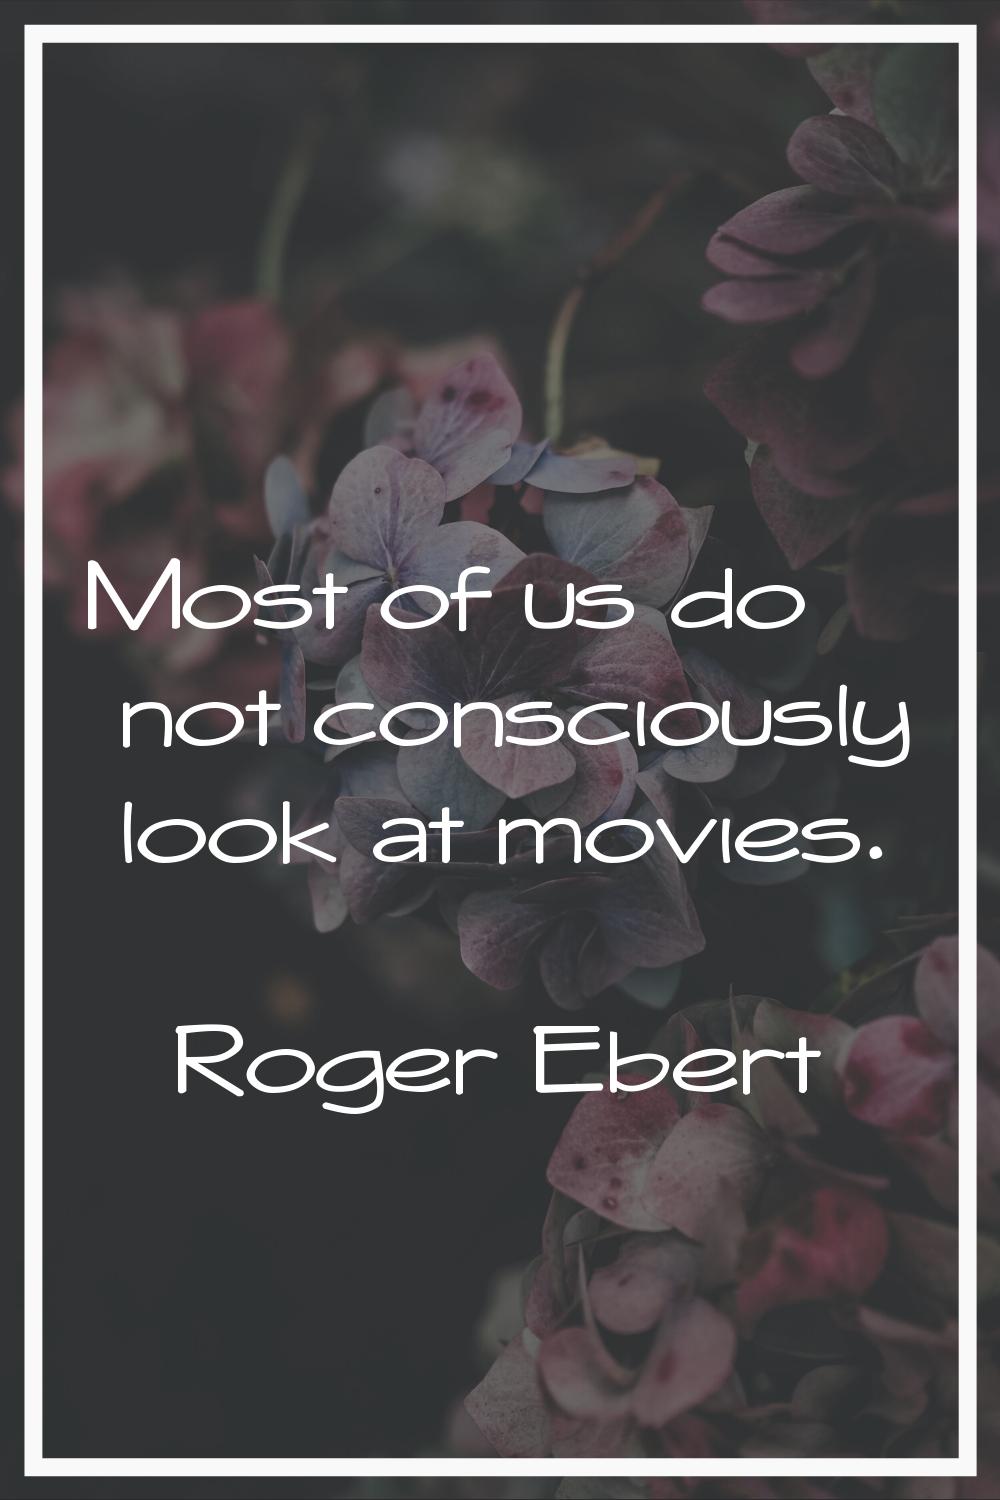 Most of us do not consciously look at movies.